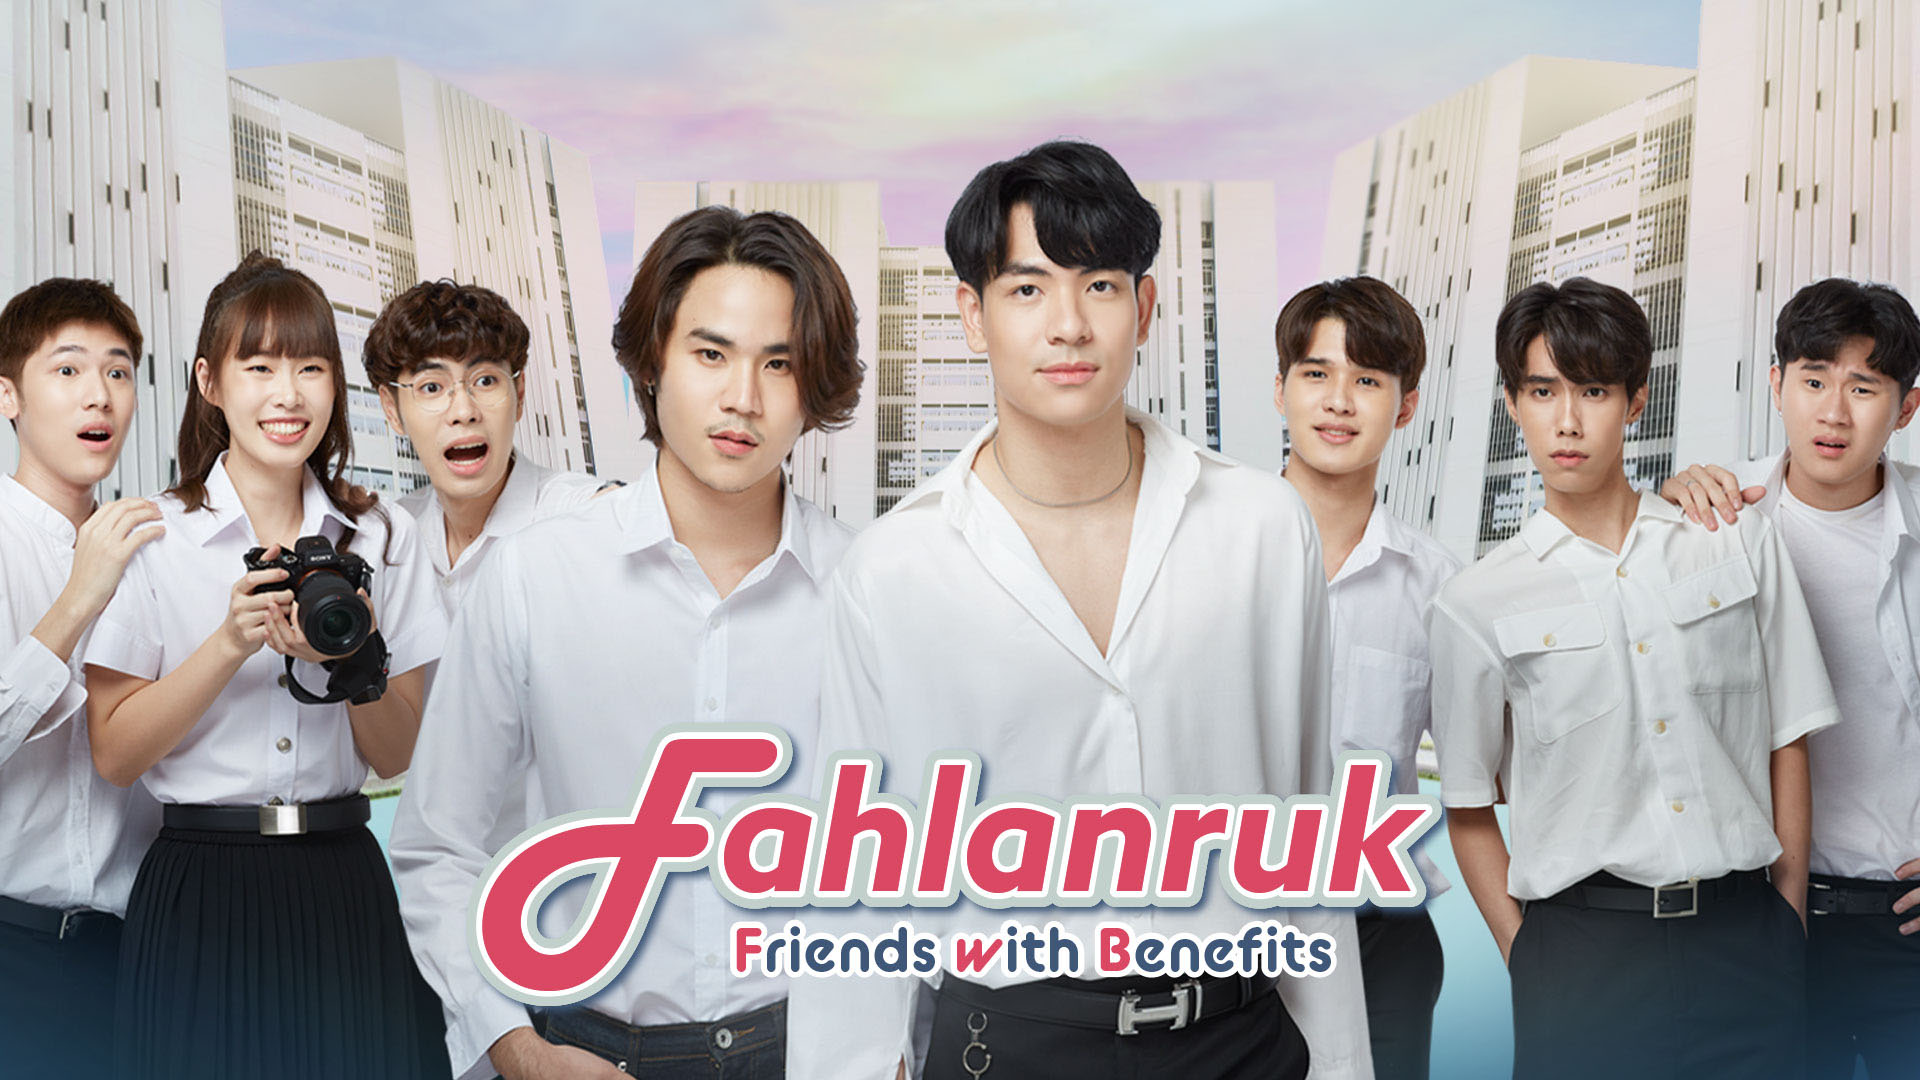 Fahlanruk～Friends with Benefits～